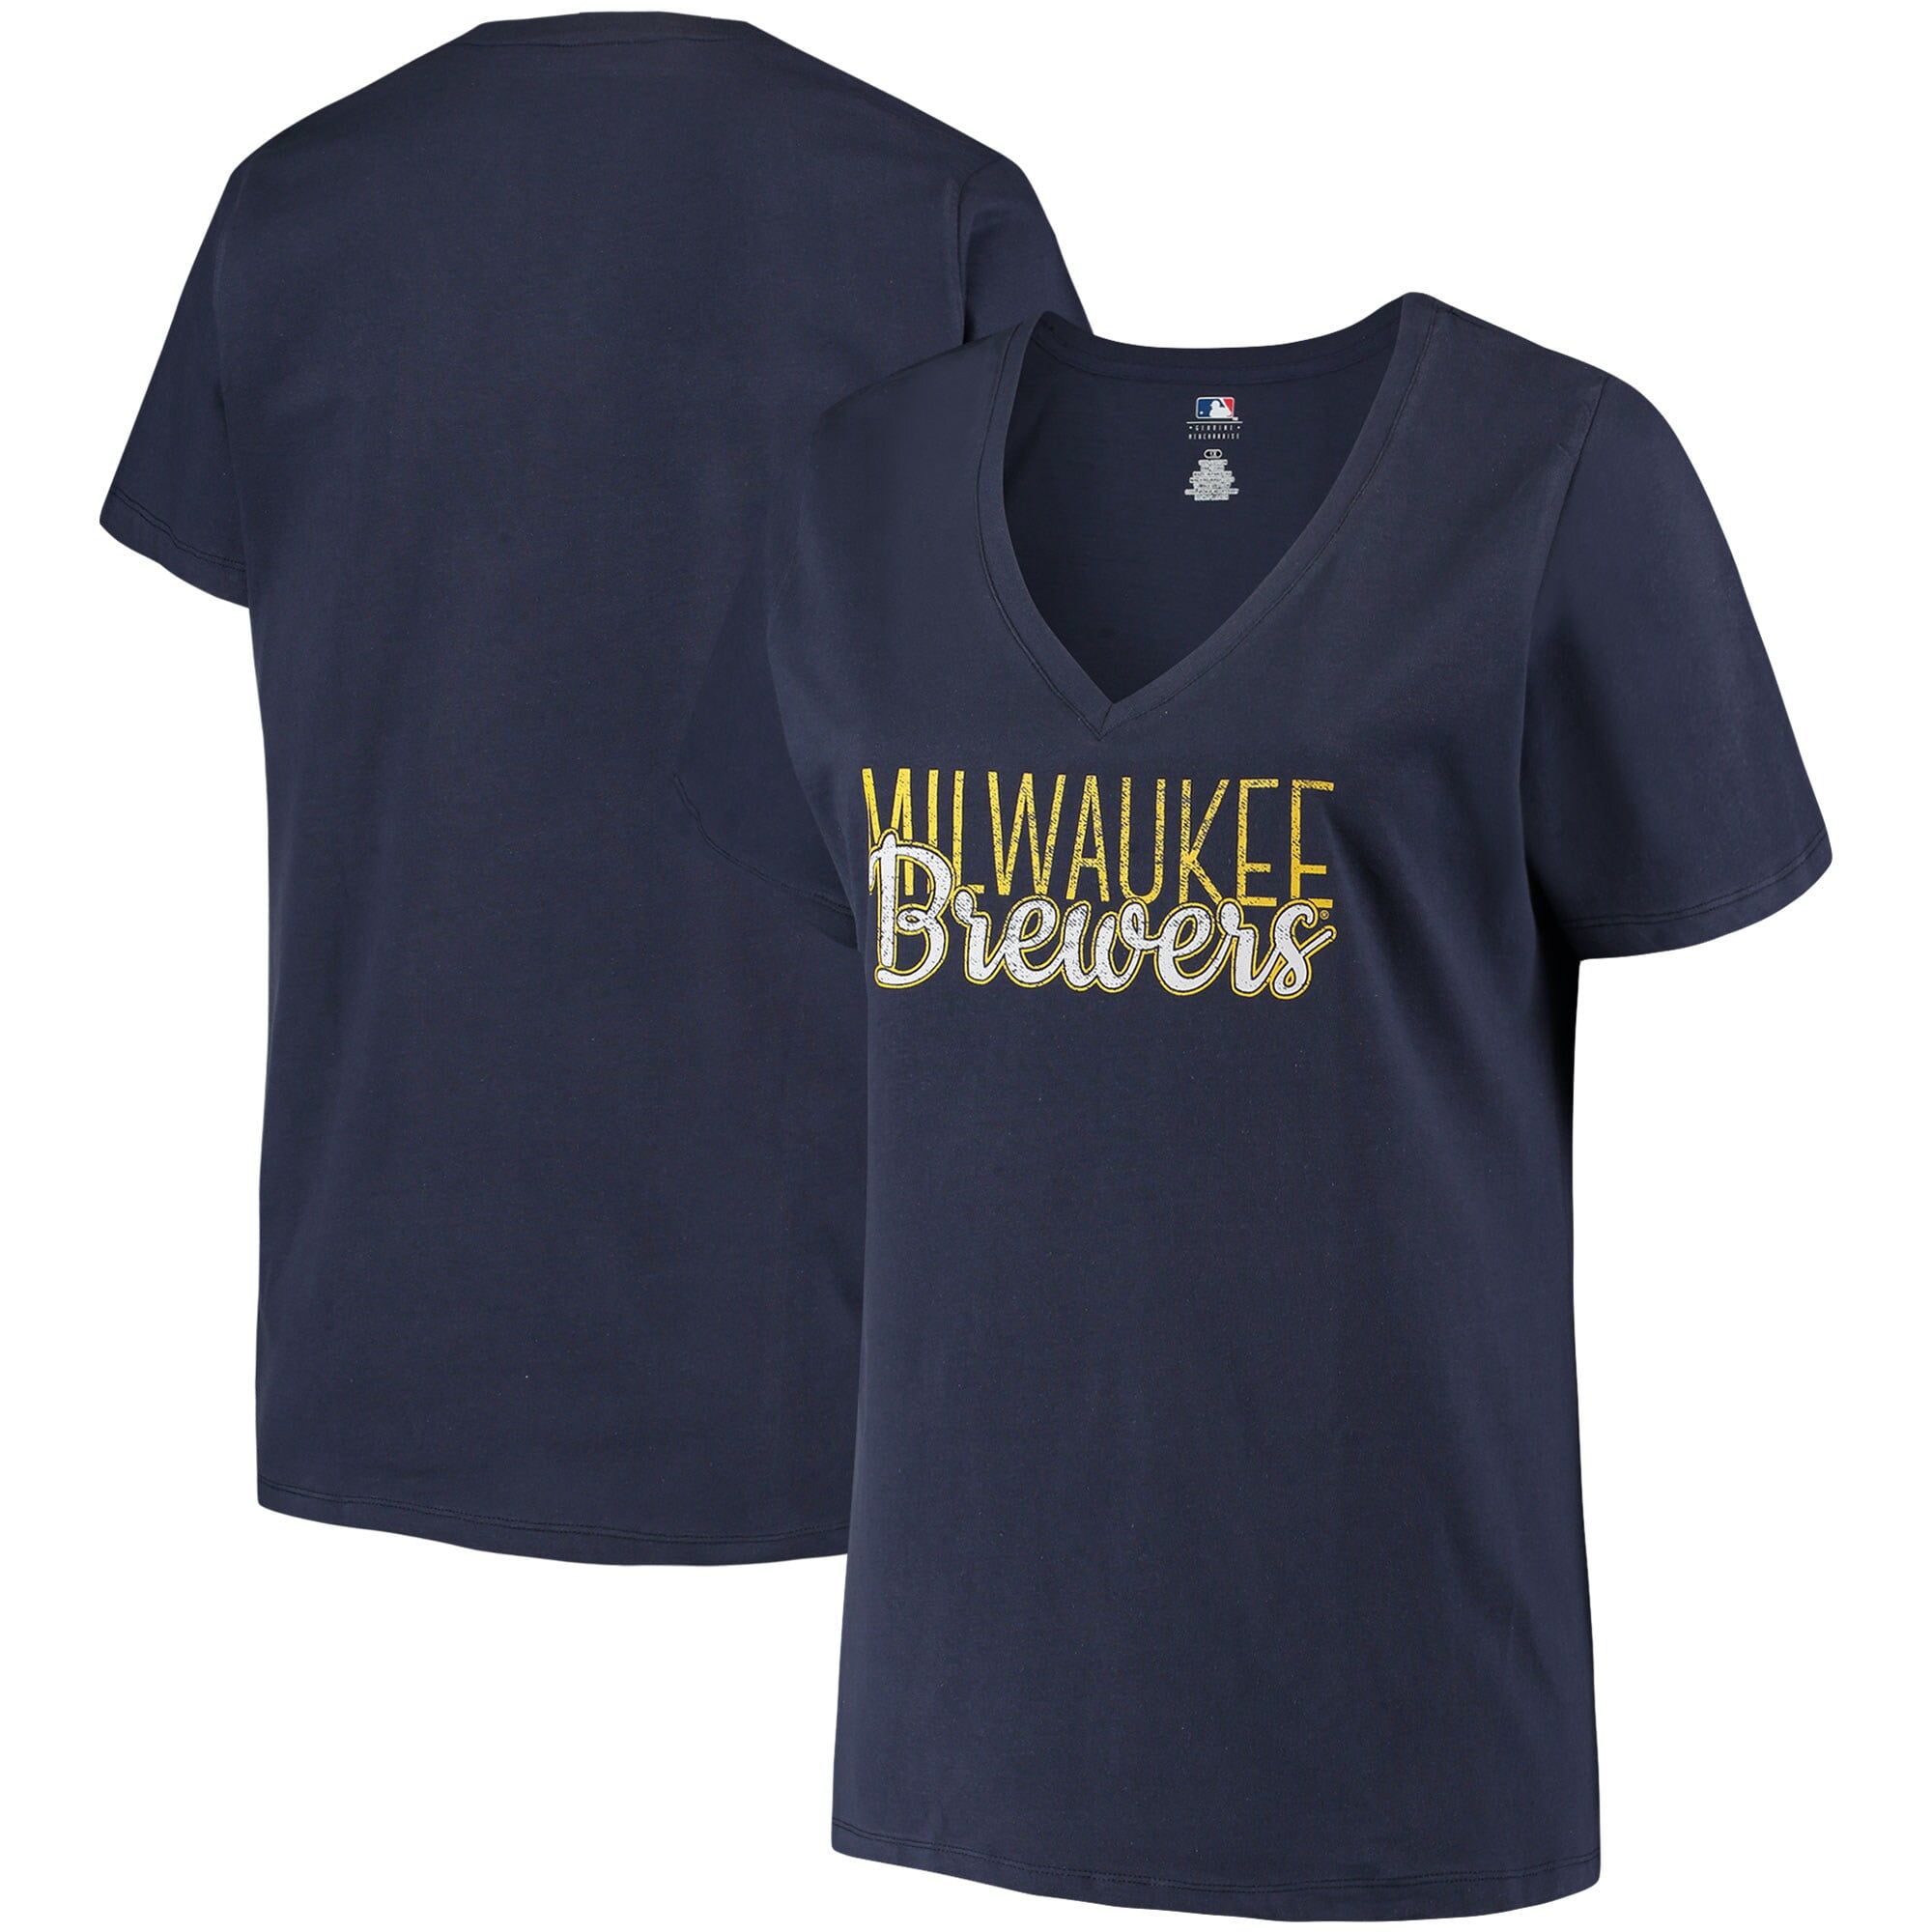 women's plus size brewers shirts